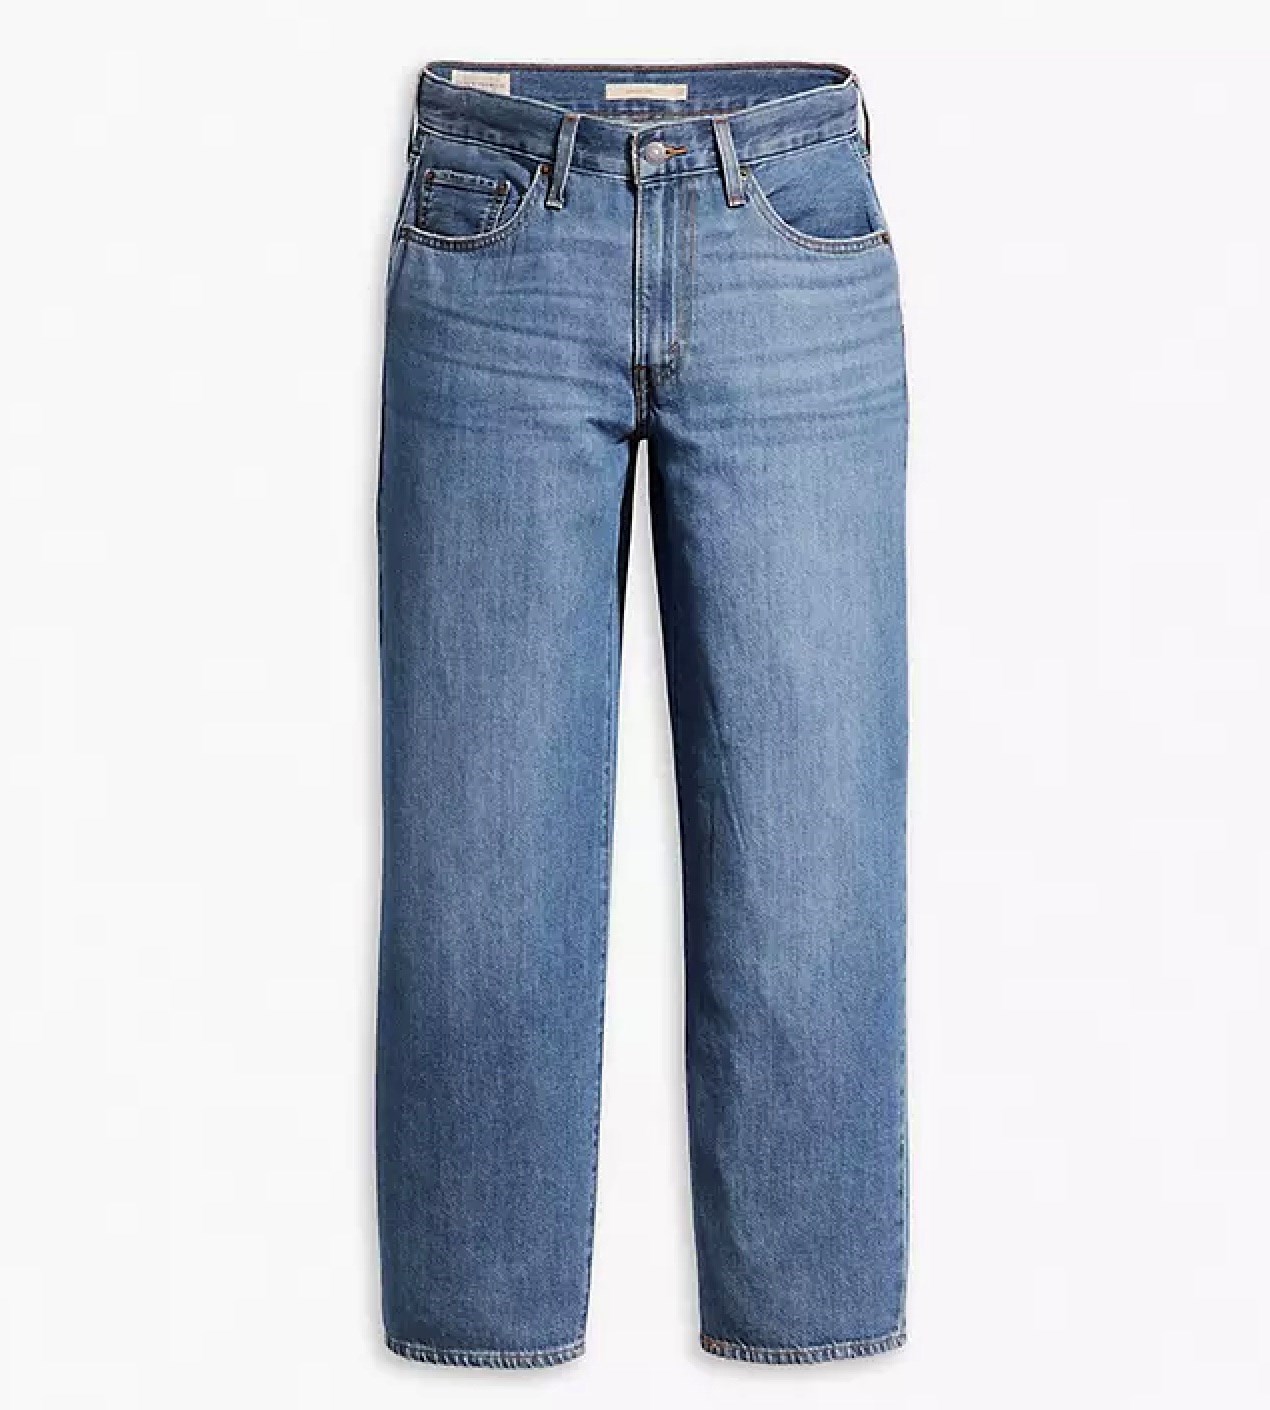  BAGGY DAD LIGHTWEIGHT JEANS